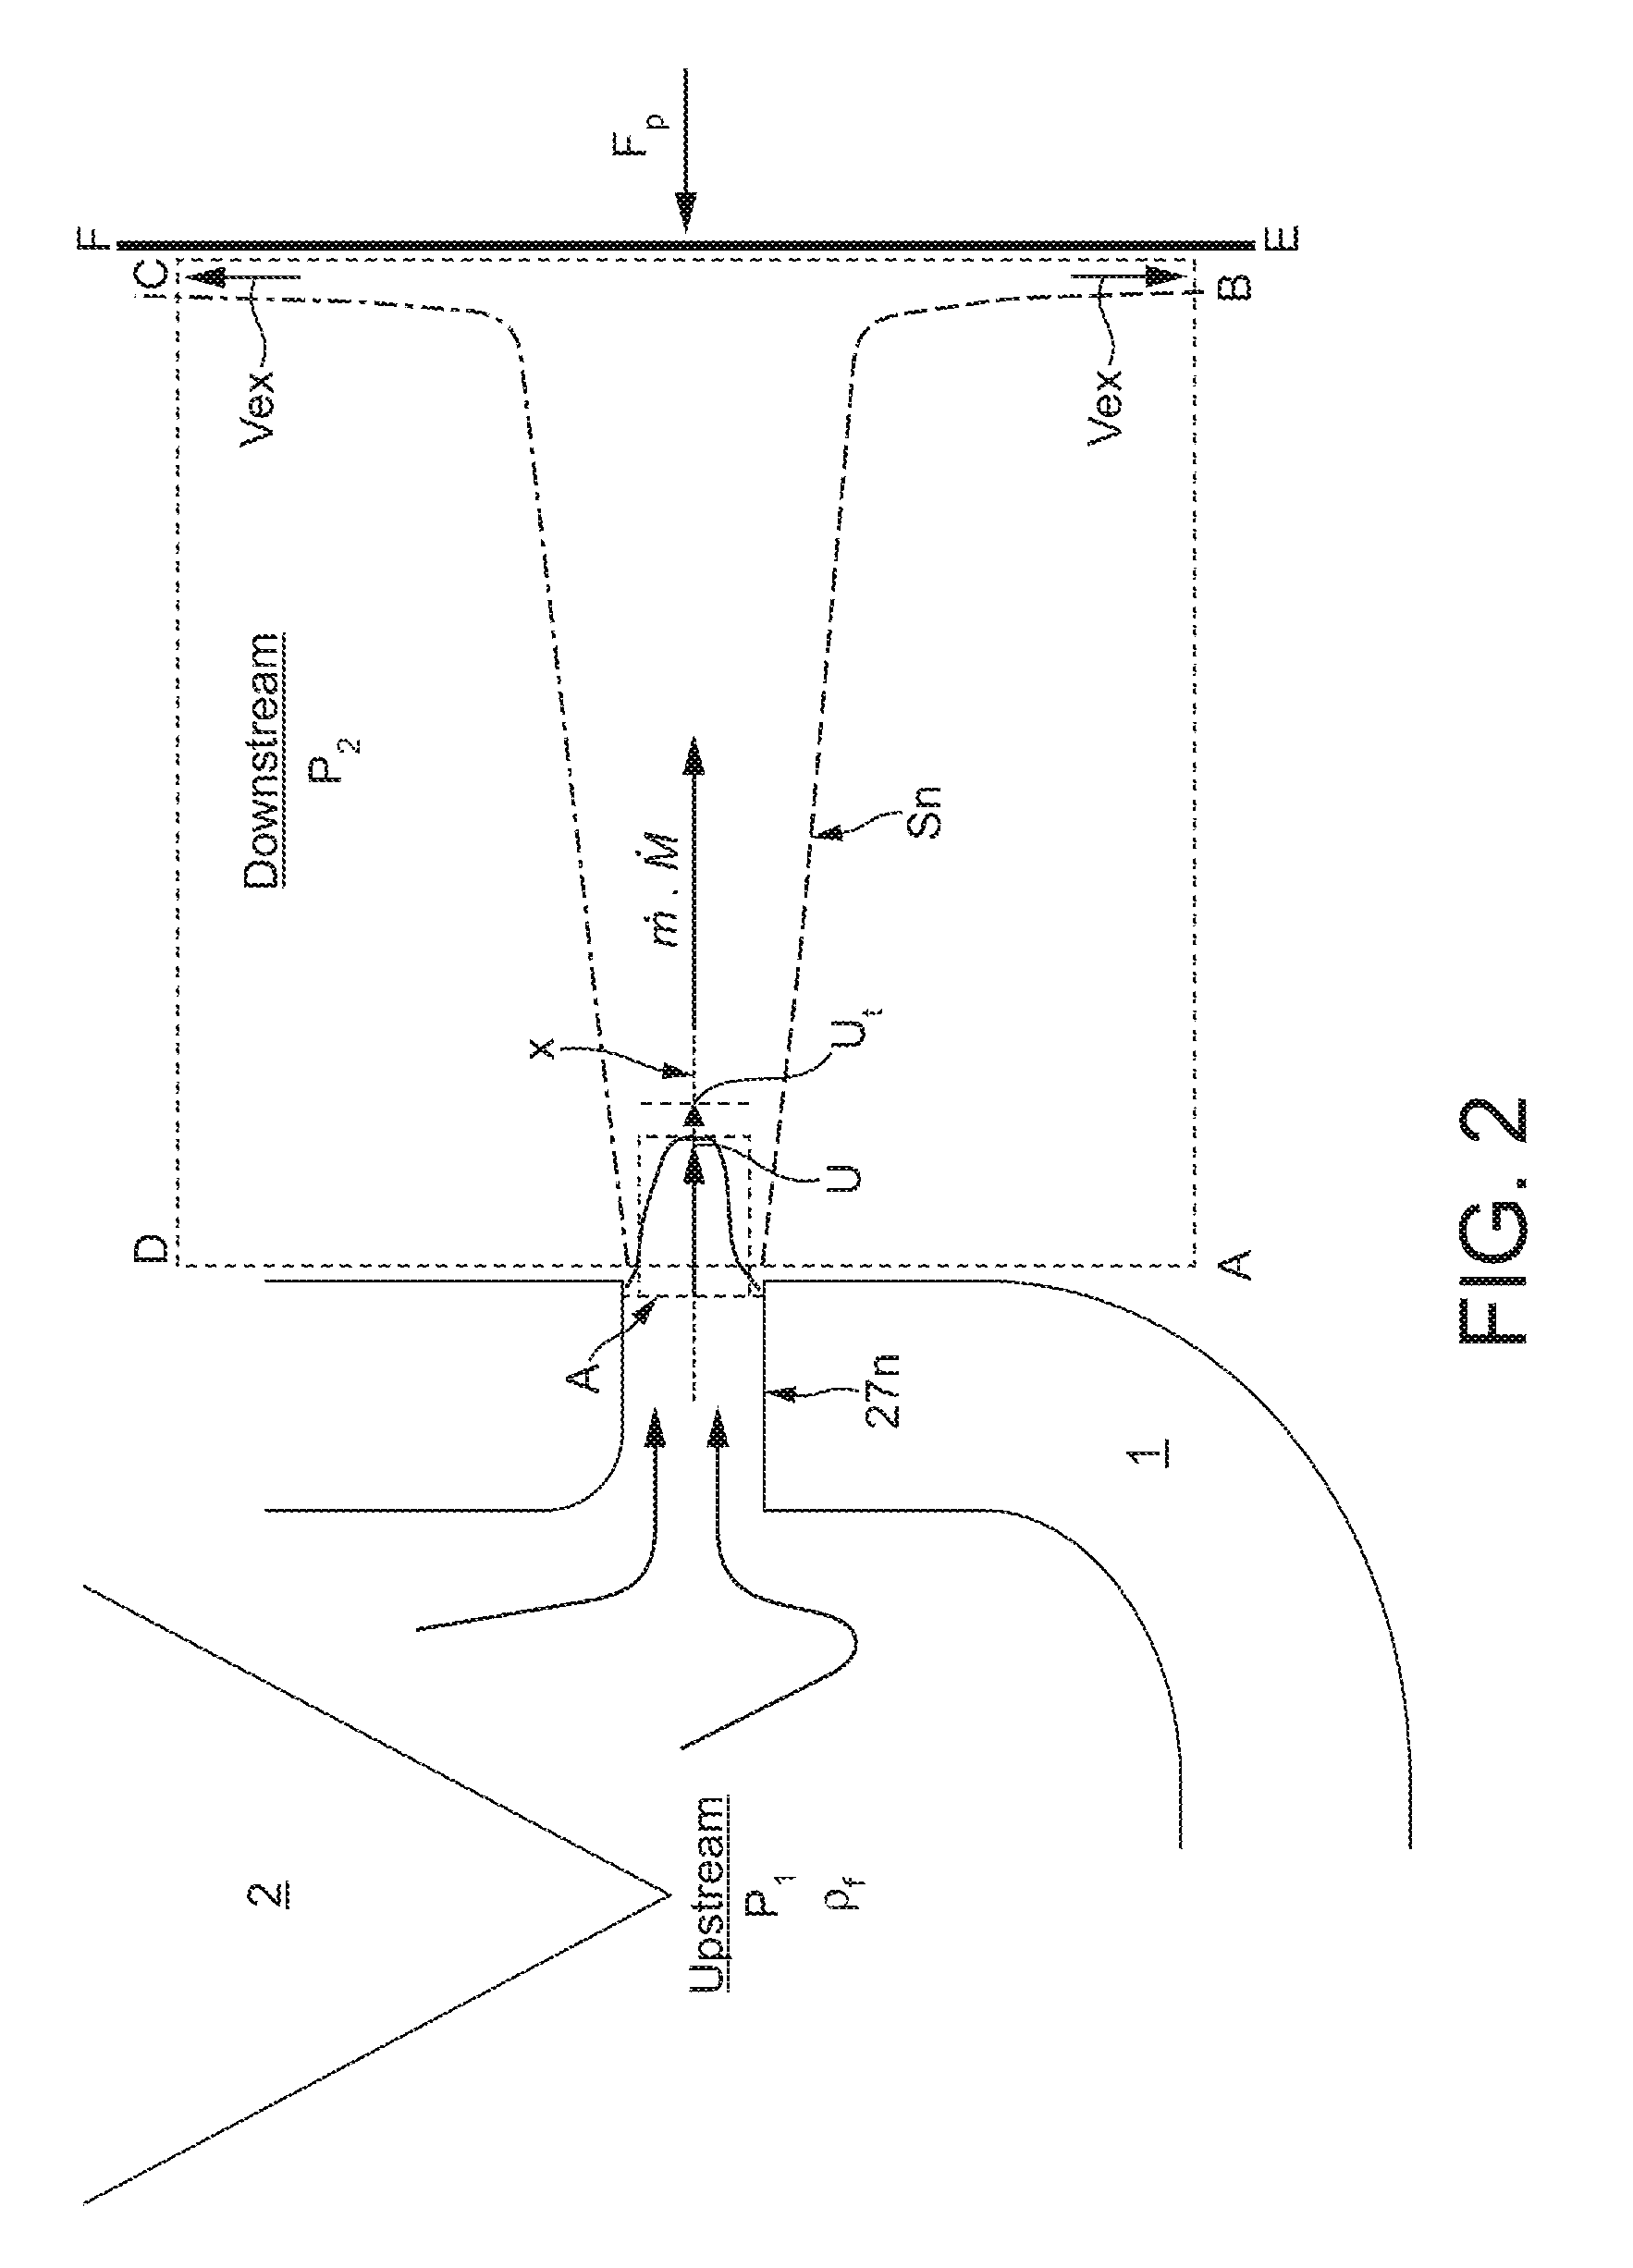 Apparatus and methods for testing a fuel injector nozzle